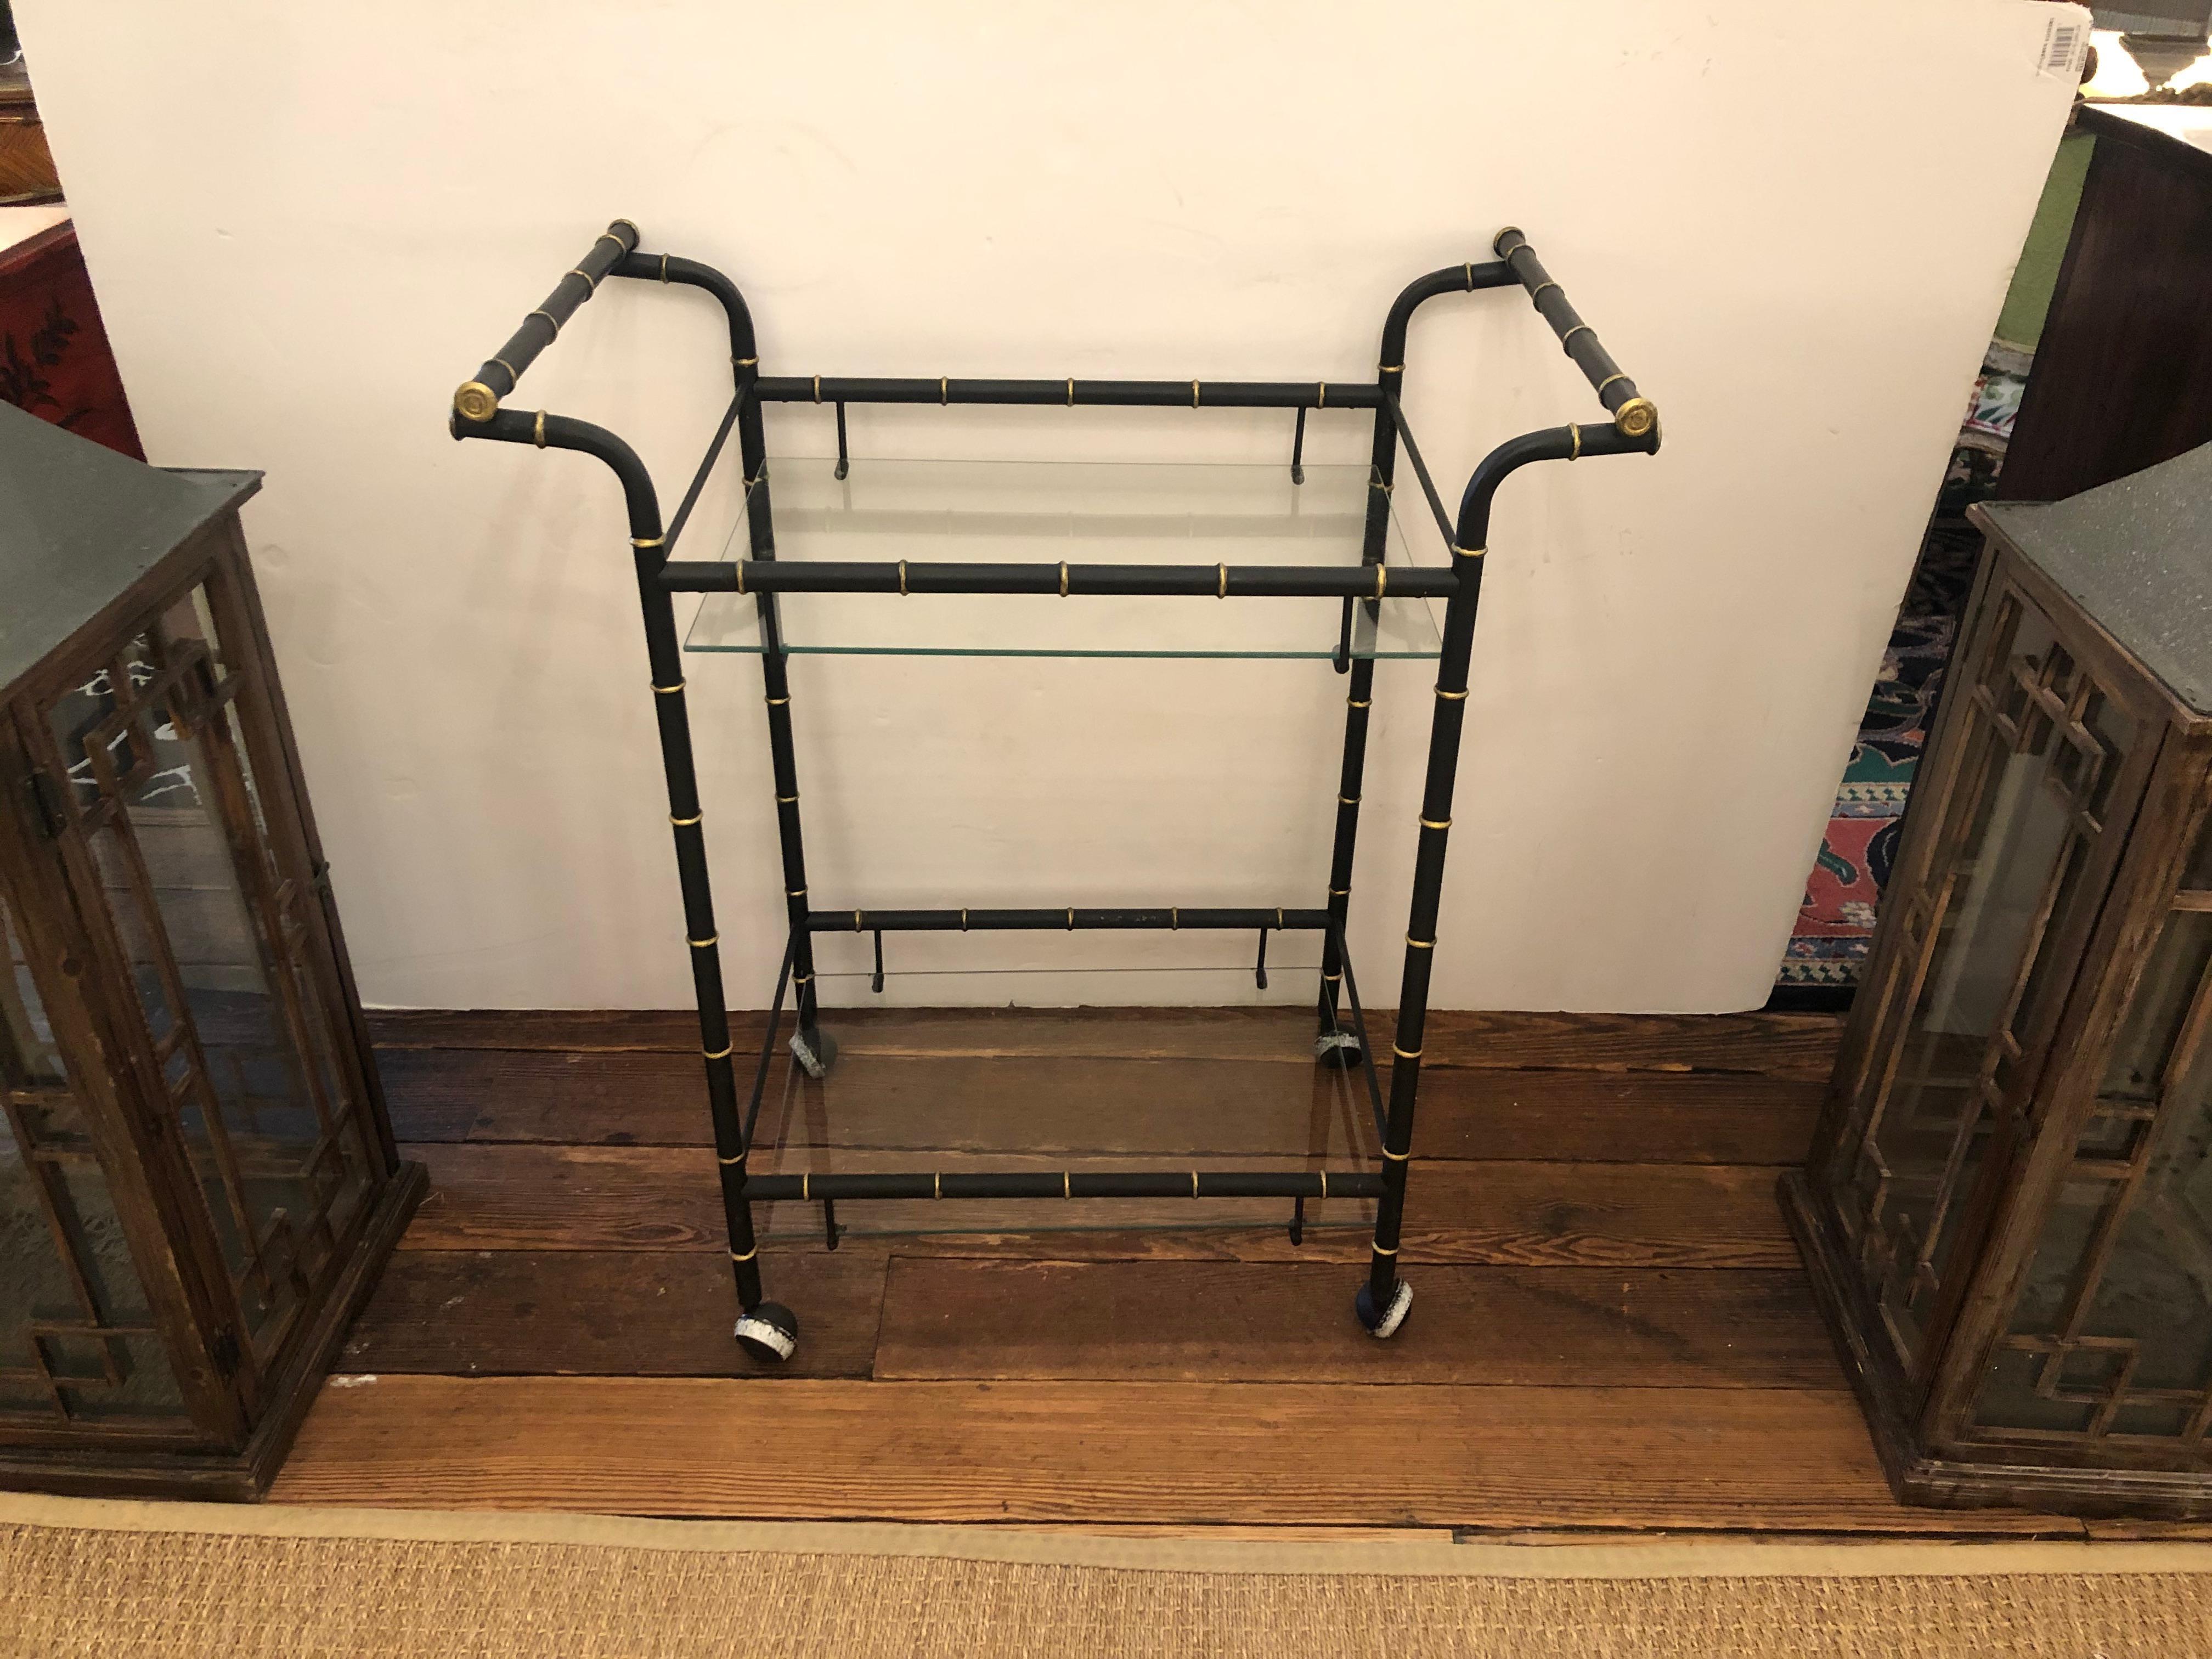 Hollywood Regency metal two tier bar cart having black and gold faux bamboo handles and frame and two glass shelves on casters. Rolls smoothly and is a versatile functional bar cart, and great as an end table too.
Measures: 28 H to top shelf
5.75